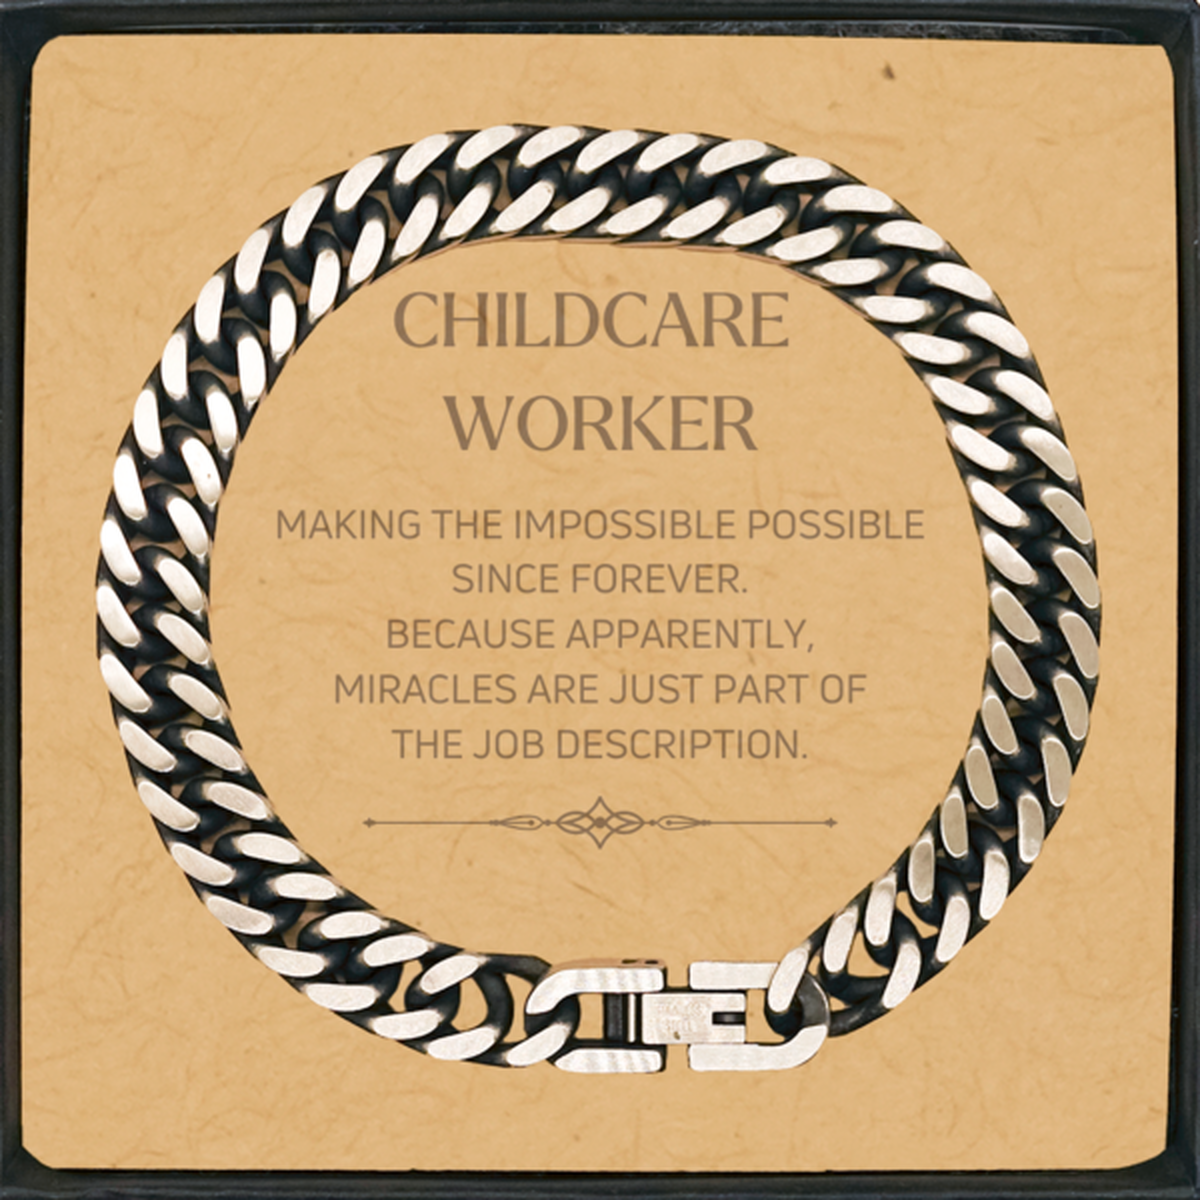 Funny Childcare Worker Gifts, Miracles are just part of the job description, Inspirational Birthday Cuban Link Chain Bracelet For Childcare Worker, Men, Women, Coworkers, Friends, Boss